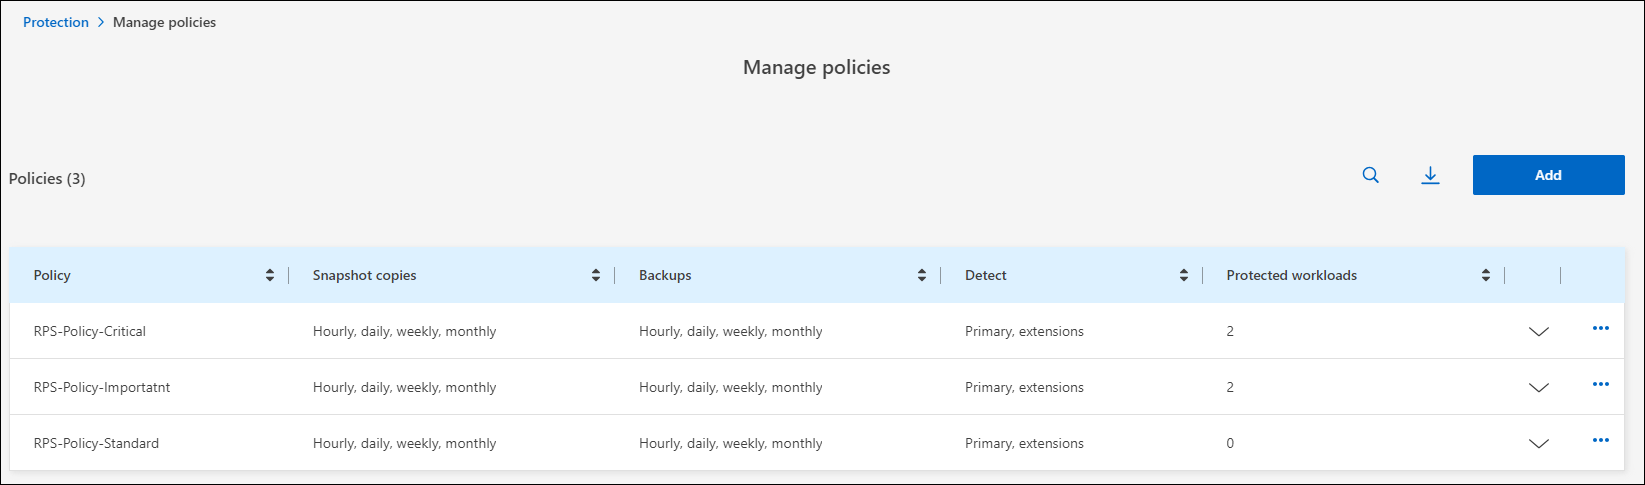 Manage policies page